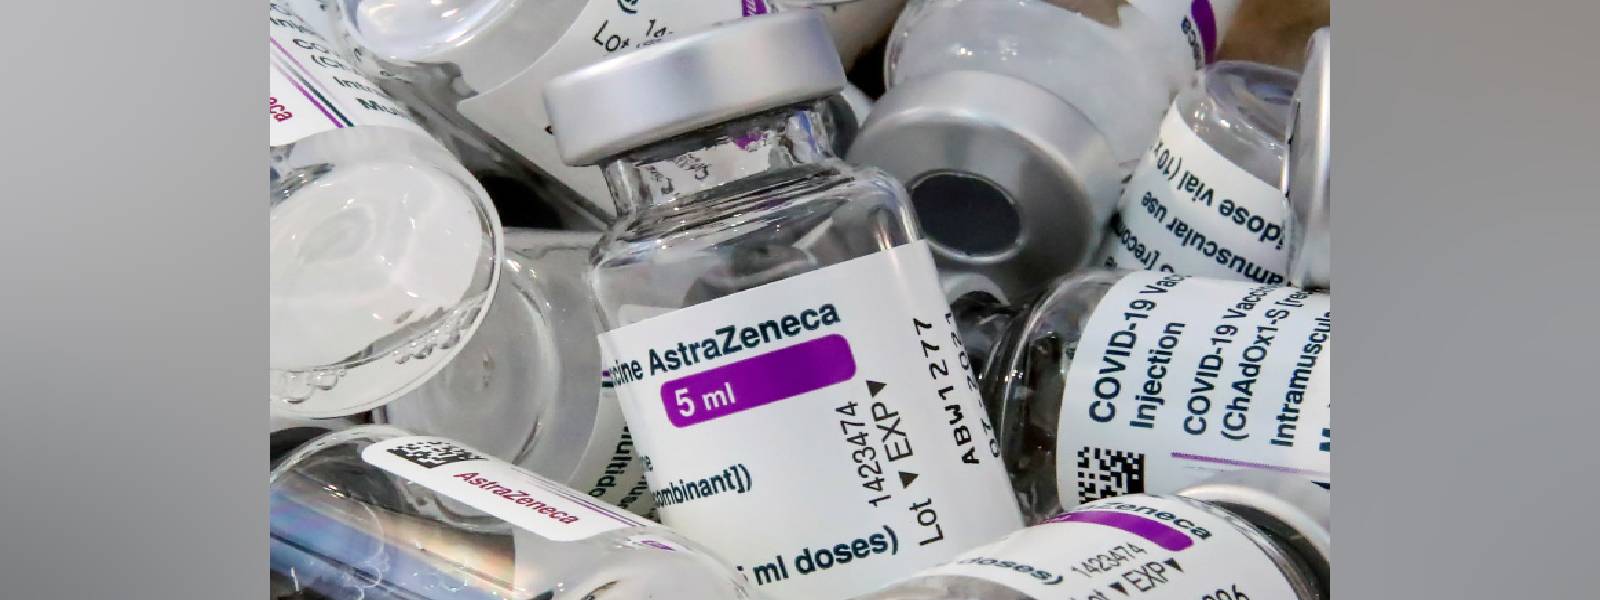 Another 700,000 doses of AstraZeneca to arrive on Saturday